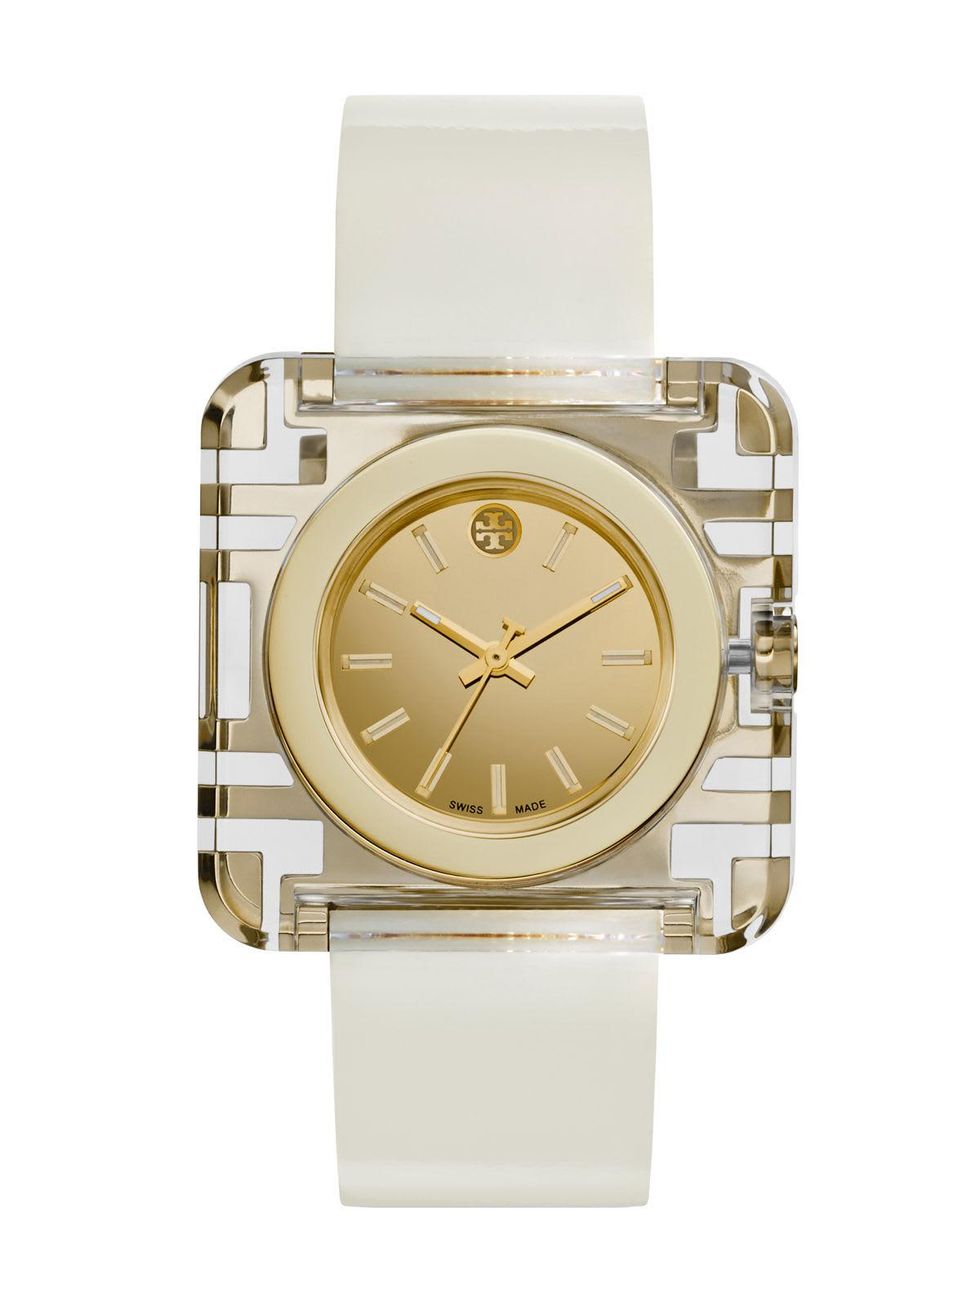 Before Domain boutique opens, take a peek at Tory Burch's unique new watch  collection - CultureMap Austin